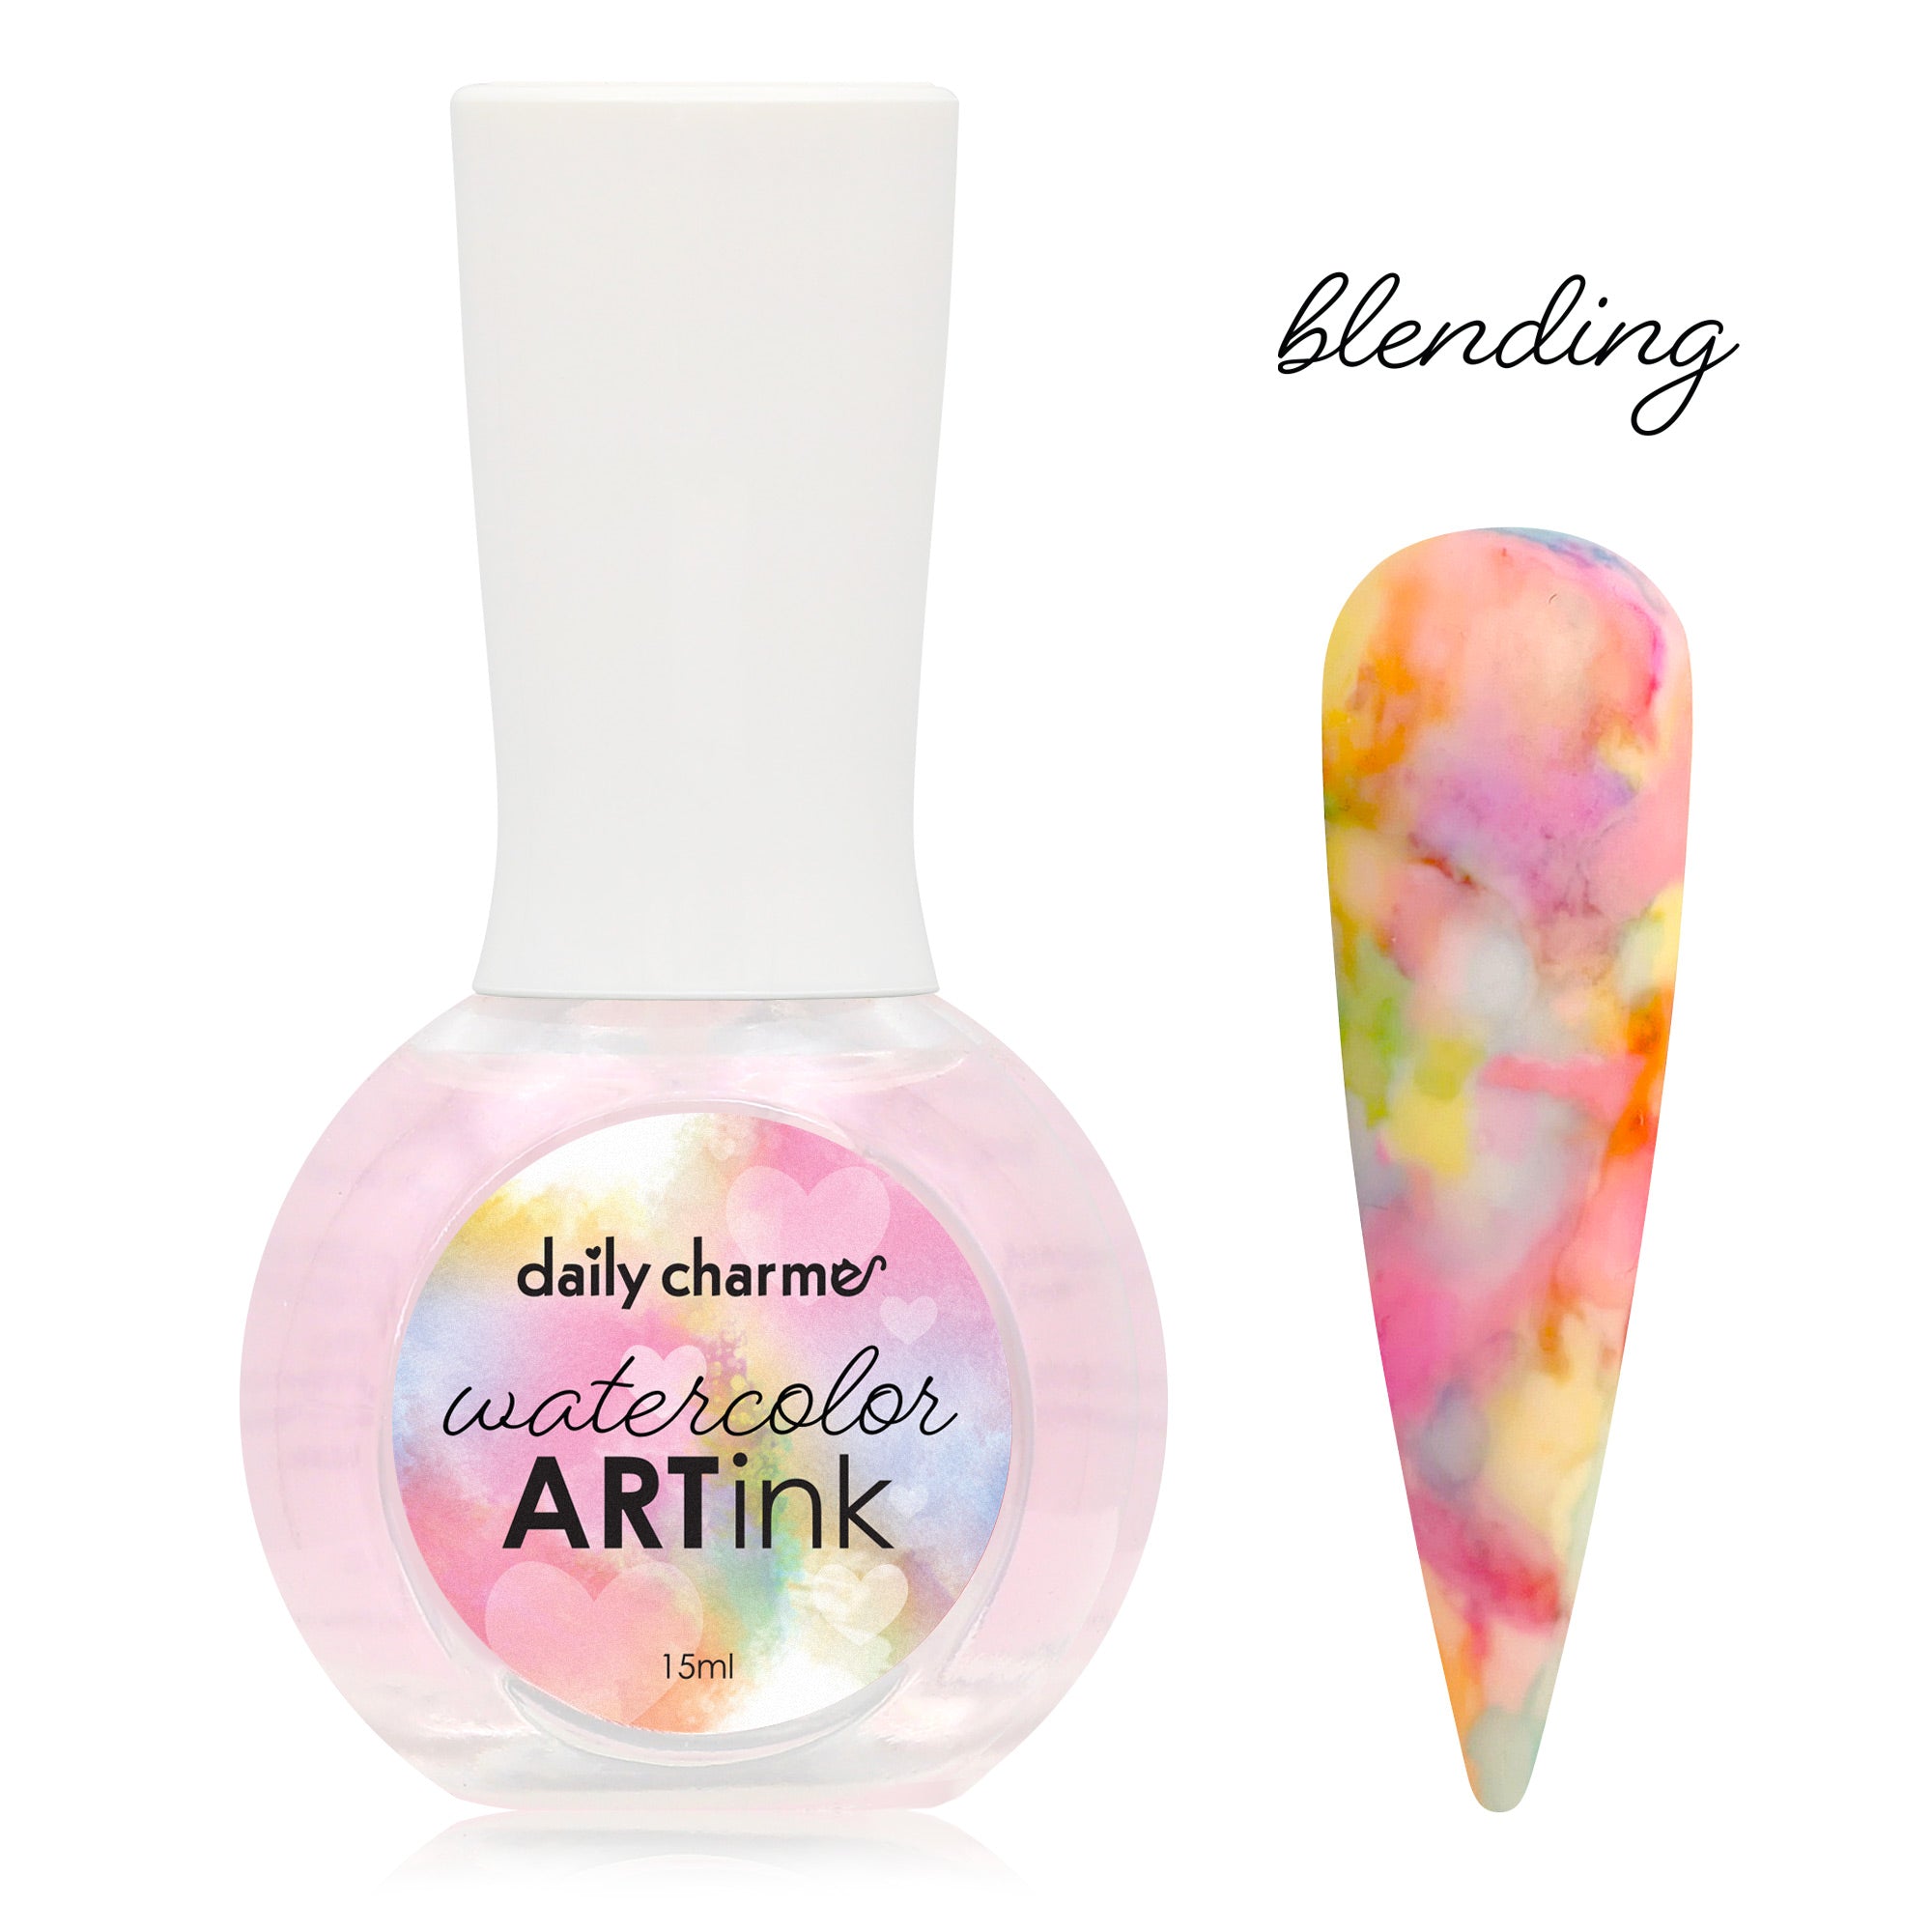 Daily Charme Watercolor Art Ink / Blending Liquid Marble Nails